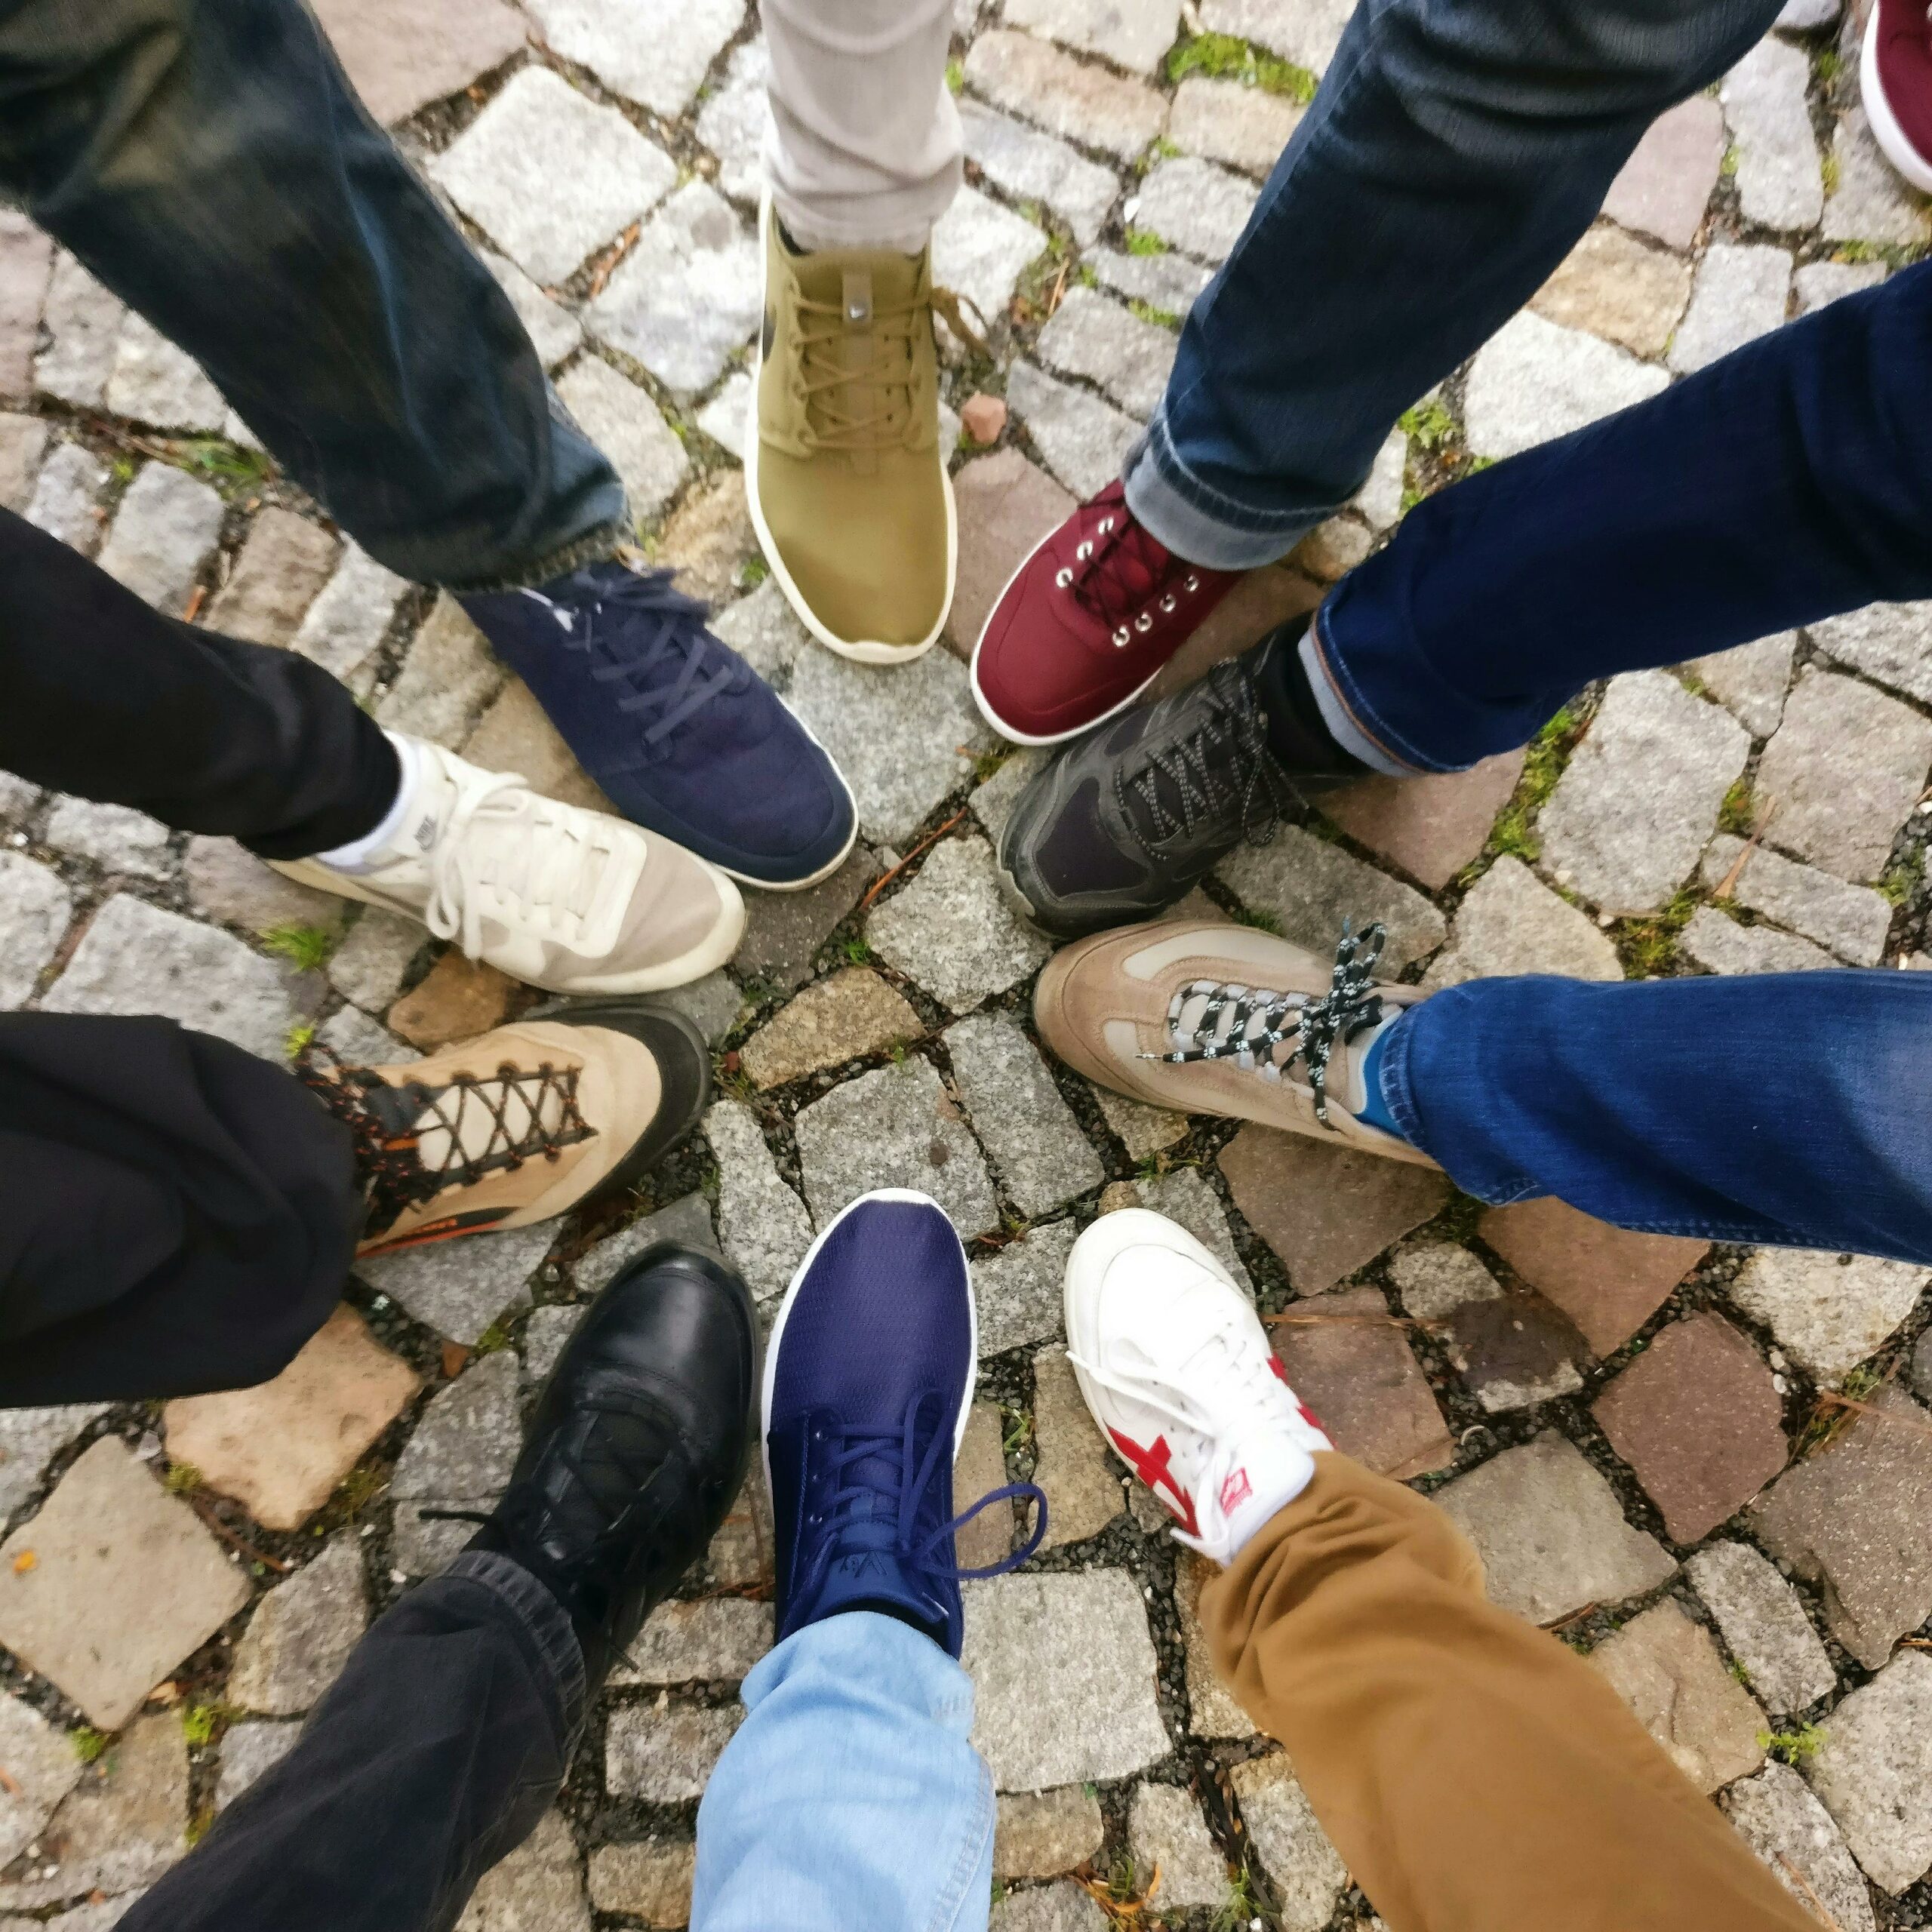 A diverse group of people's feet and legs standing in a circle, each wearing different types of shoes or sneakers.